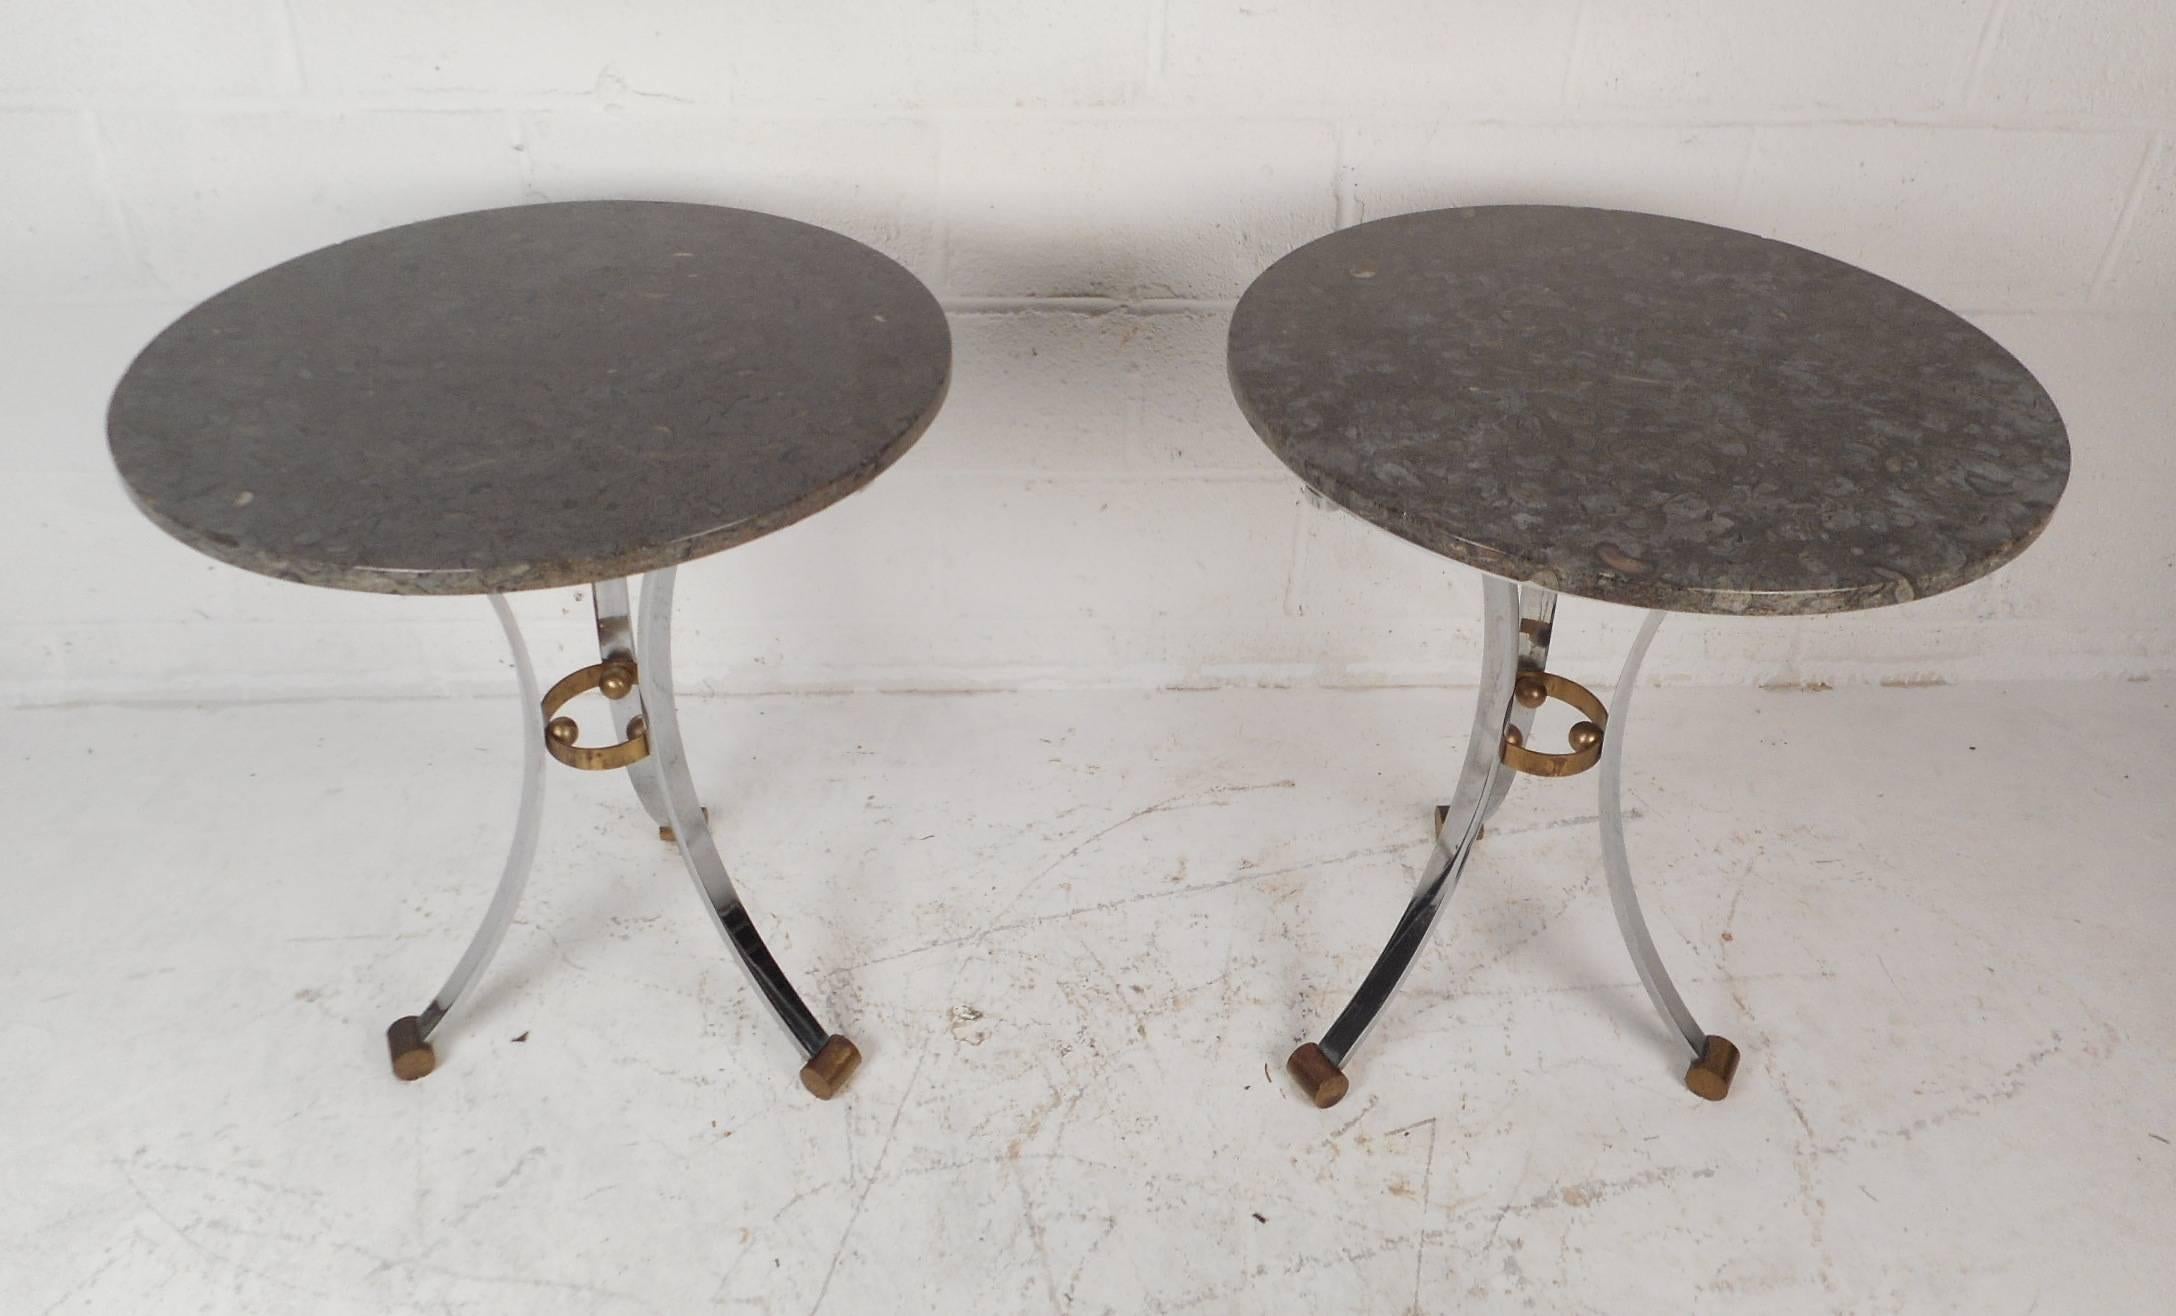 This stunning pair of vintage modern side tables feature a round marble top with unusual chrome bases. The smooth marble top with a wonderful design and brass feet adding to the allure. Heavy chrome base with a brass center support and splayed flat